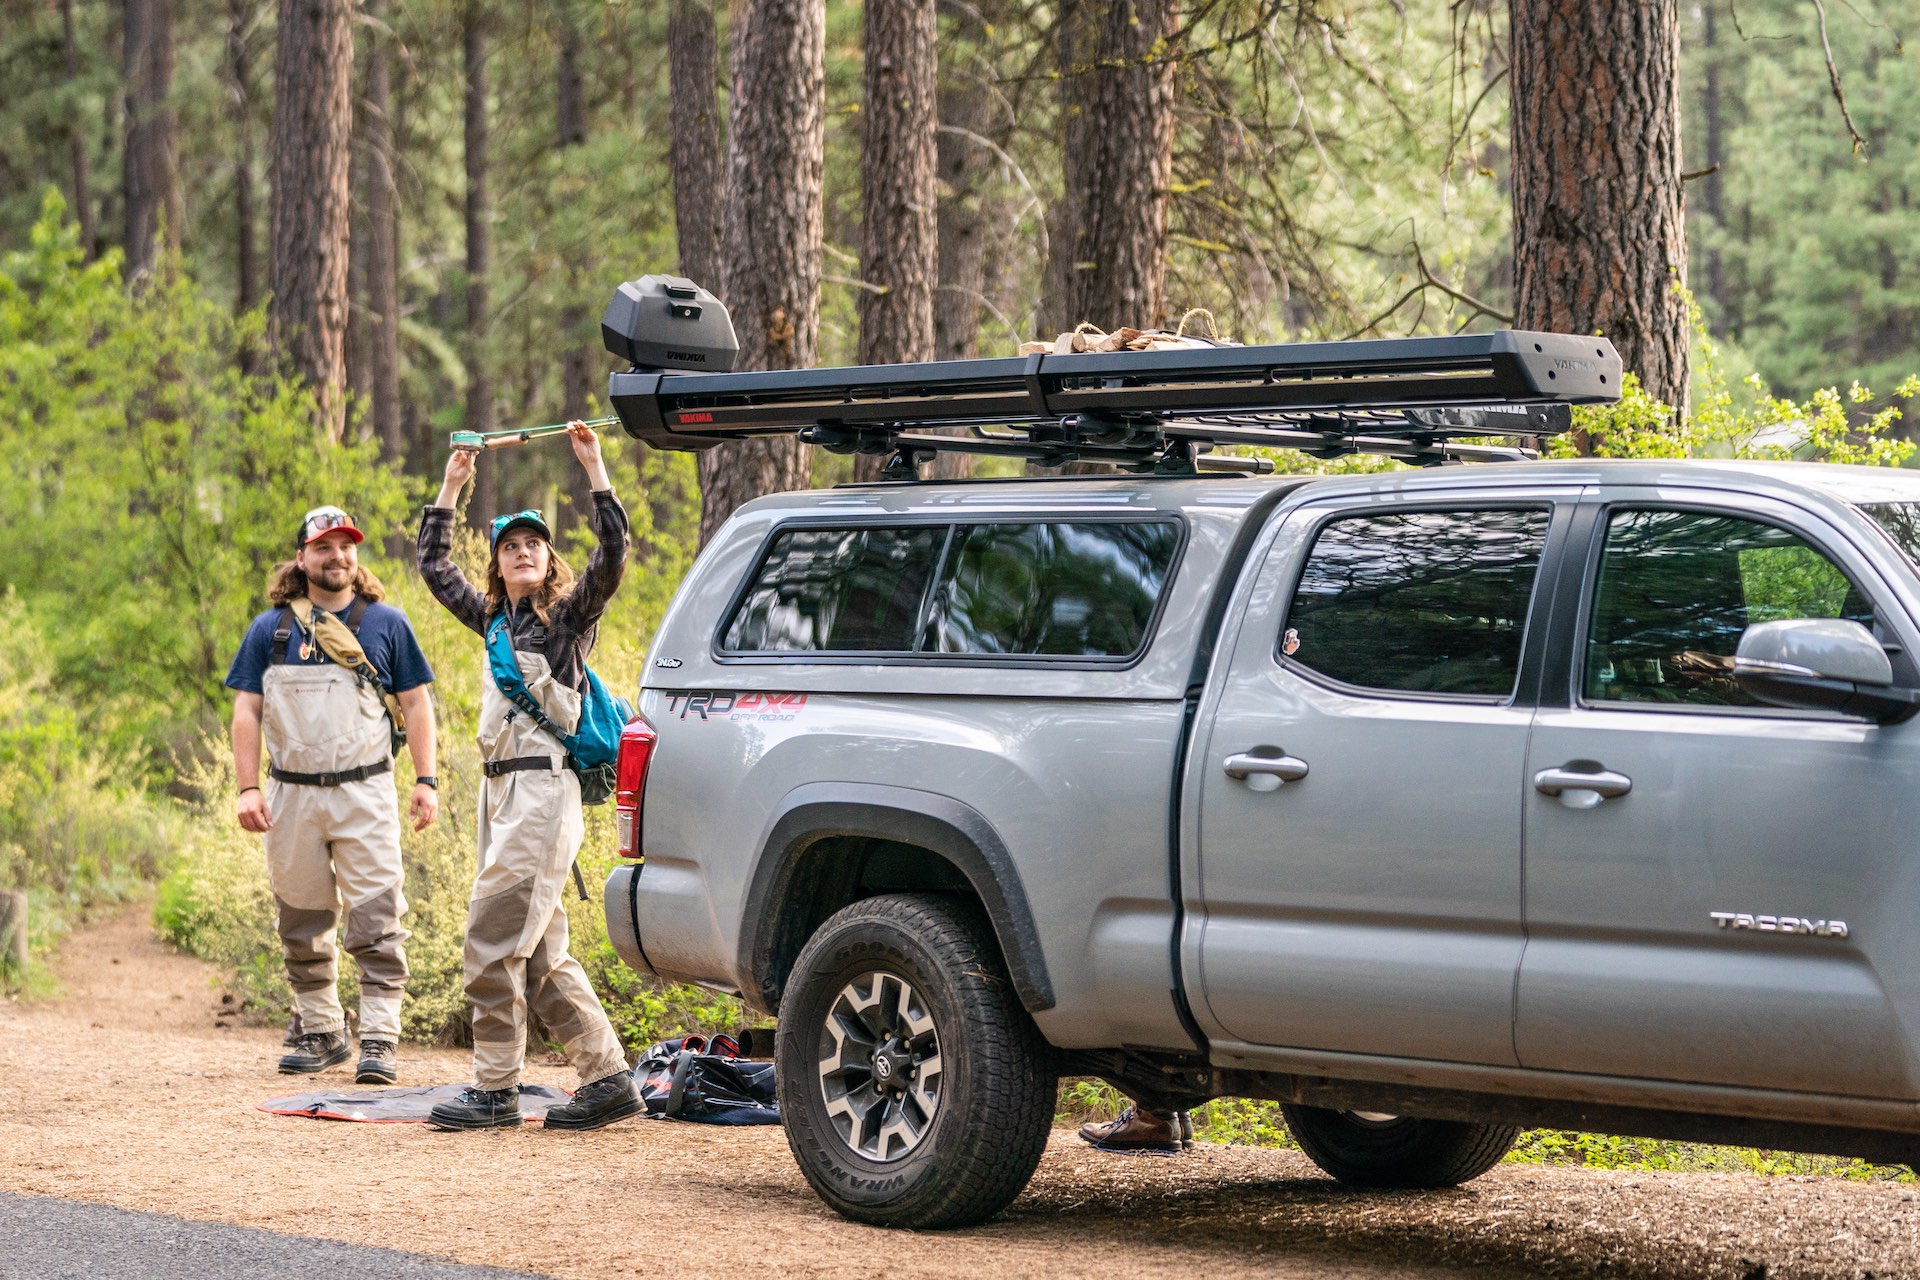 Yakima to Unveil Products for Fall 2019 at Outdoor Retailer Summer